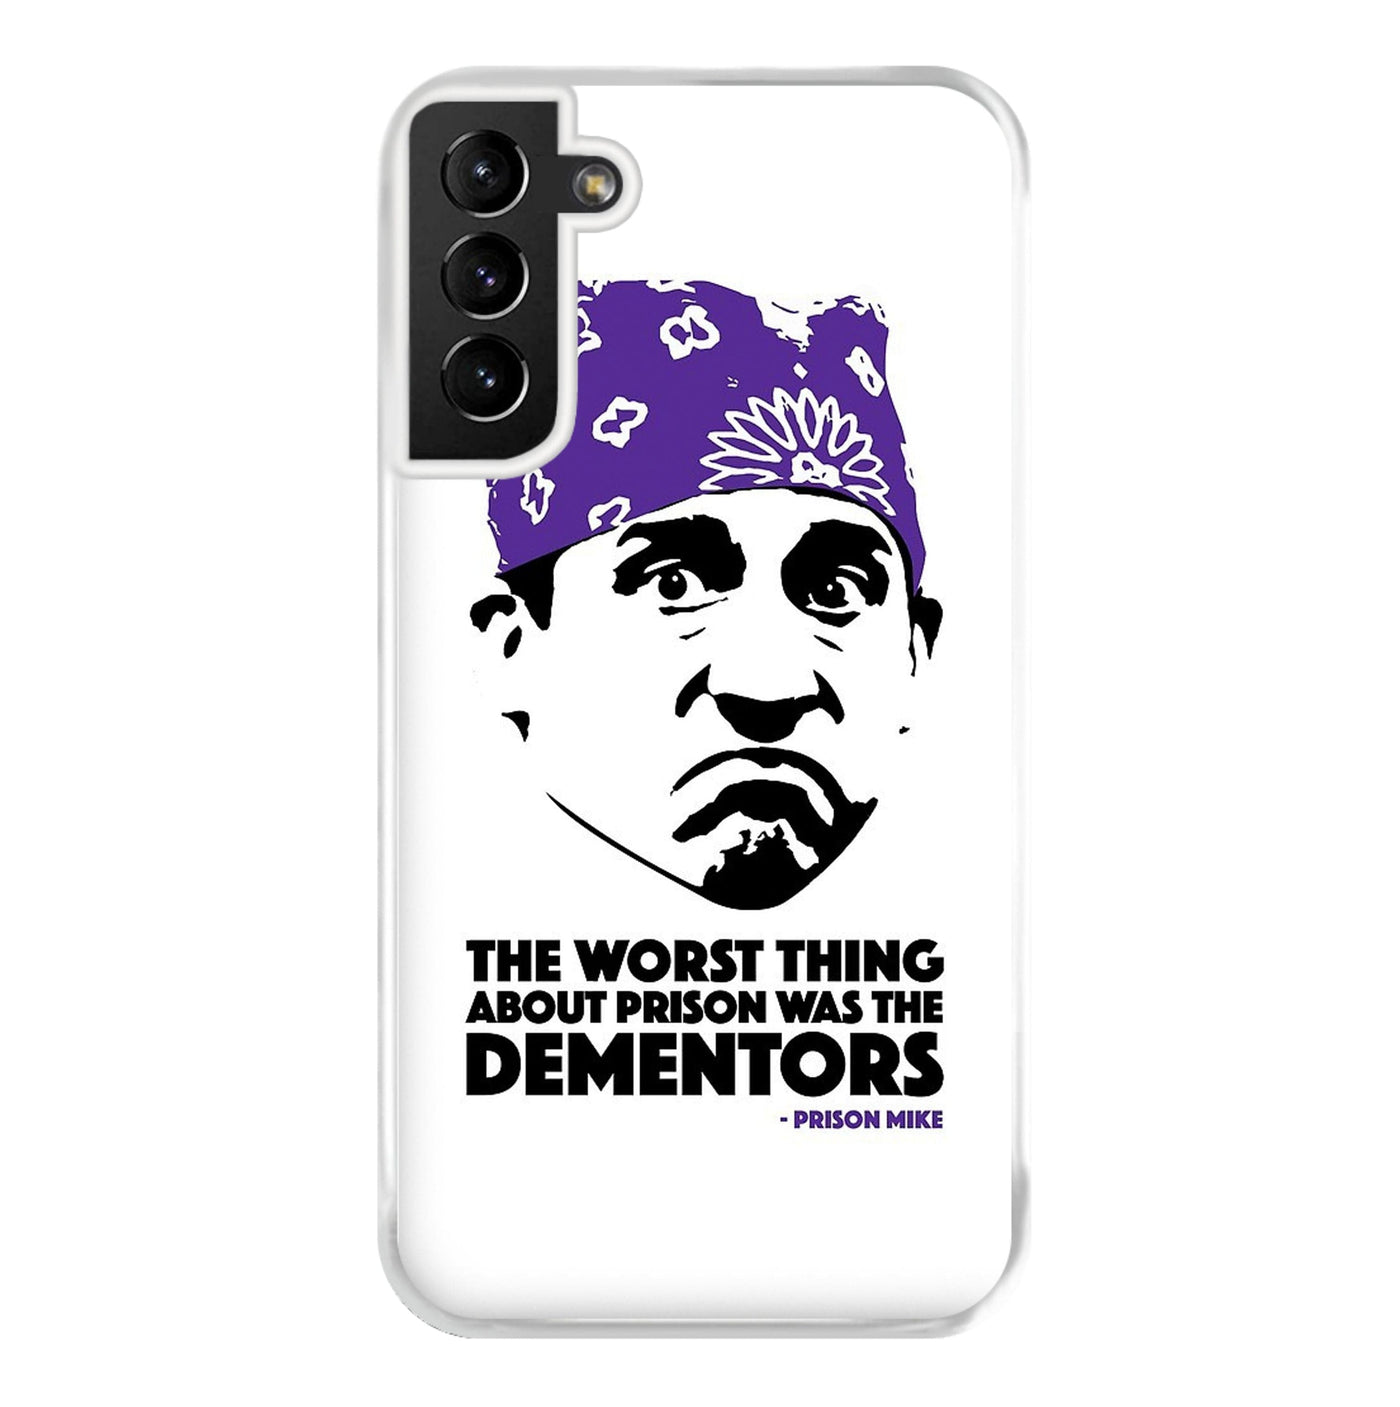 Prison Mike vs The Dementors - The Office Phone Case